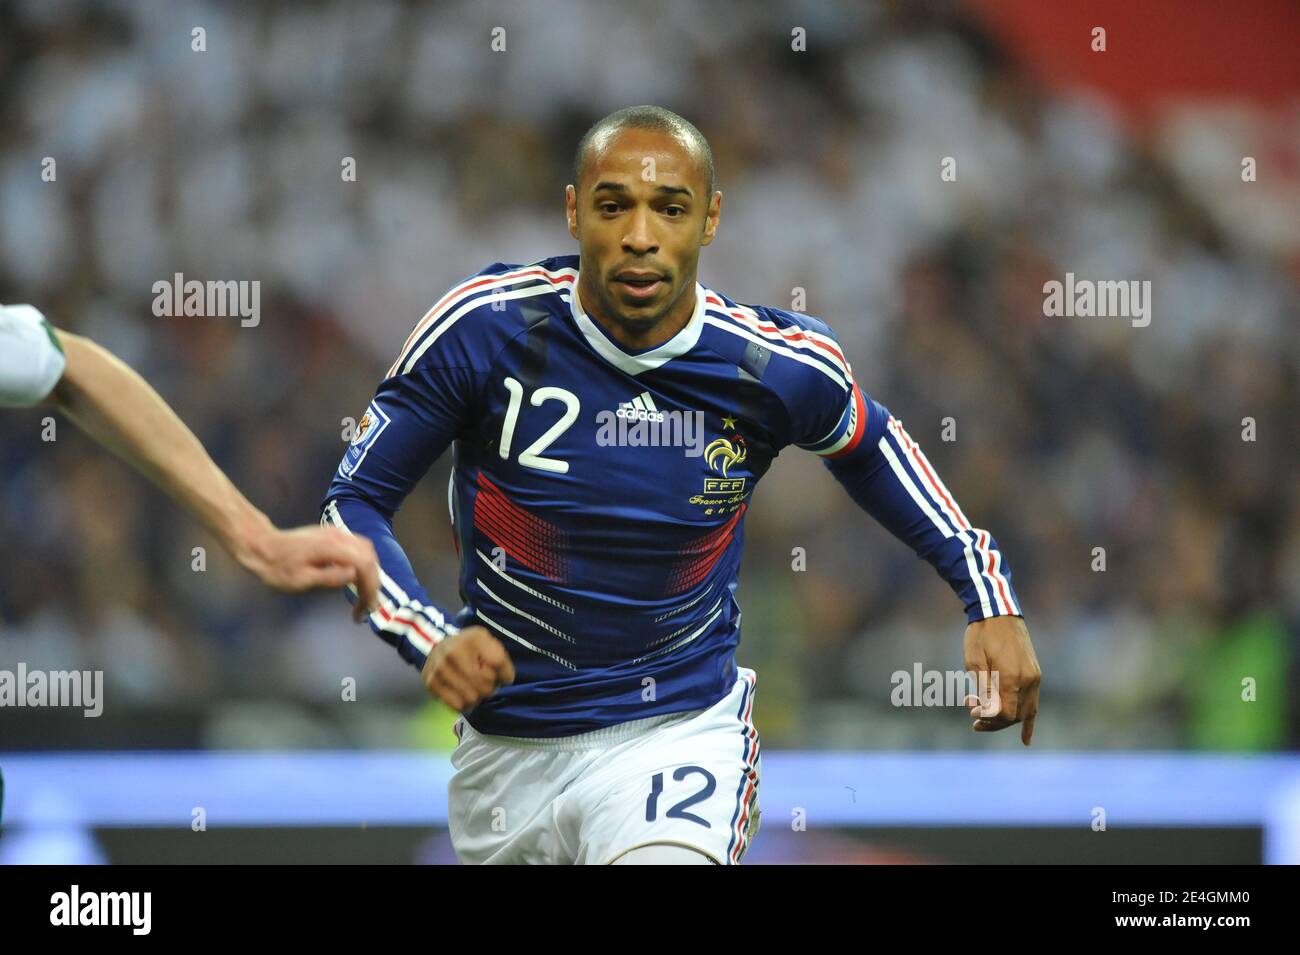 France's Thierry Henry during the World Cup Play-off soccer match, France vs Republic of Ireland at Stade de France in Saint-Denis near Paris, France on November 18, 2009. The Match ended in a 1-1 draw. Photo by Nicolas Gouhier/Cameleon/ABACAPRESS.COM Stock Photo